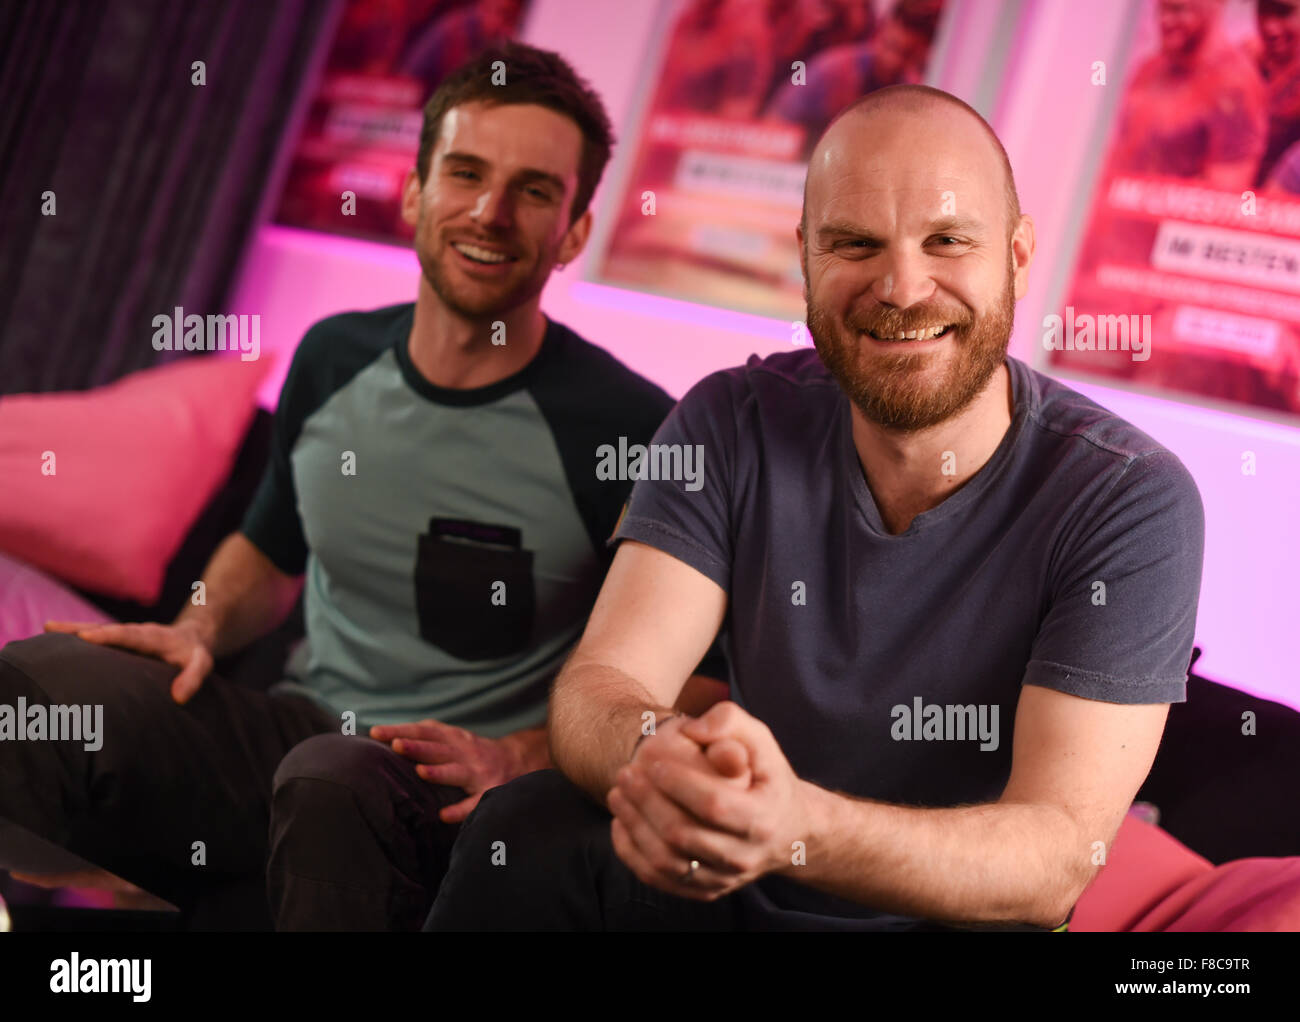 Will Champion of Coldplay arrives at the BBC Radio 1 studios London,  England - 17.12.10 Stock Photo - Alamy